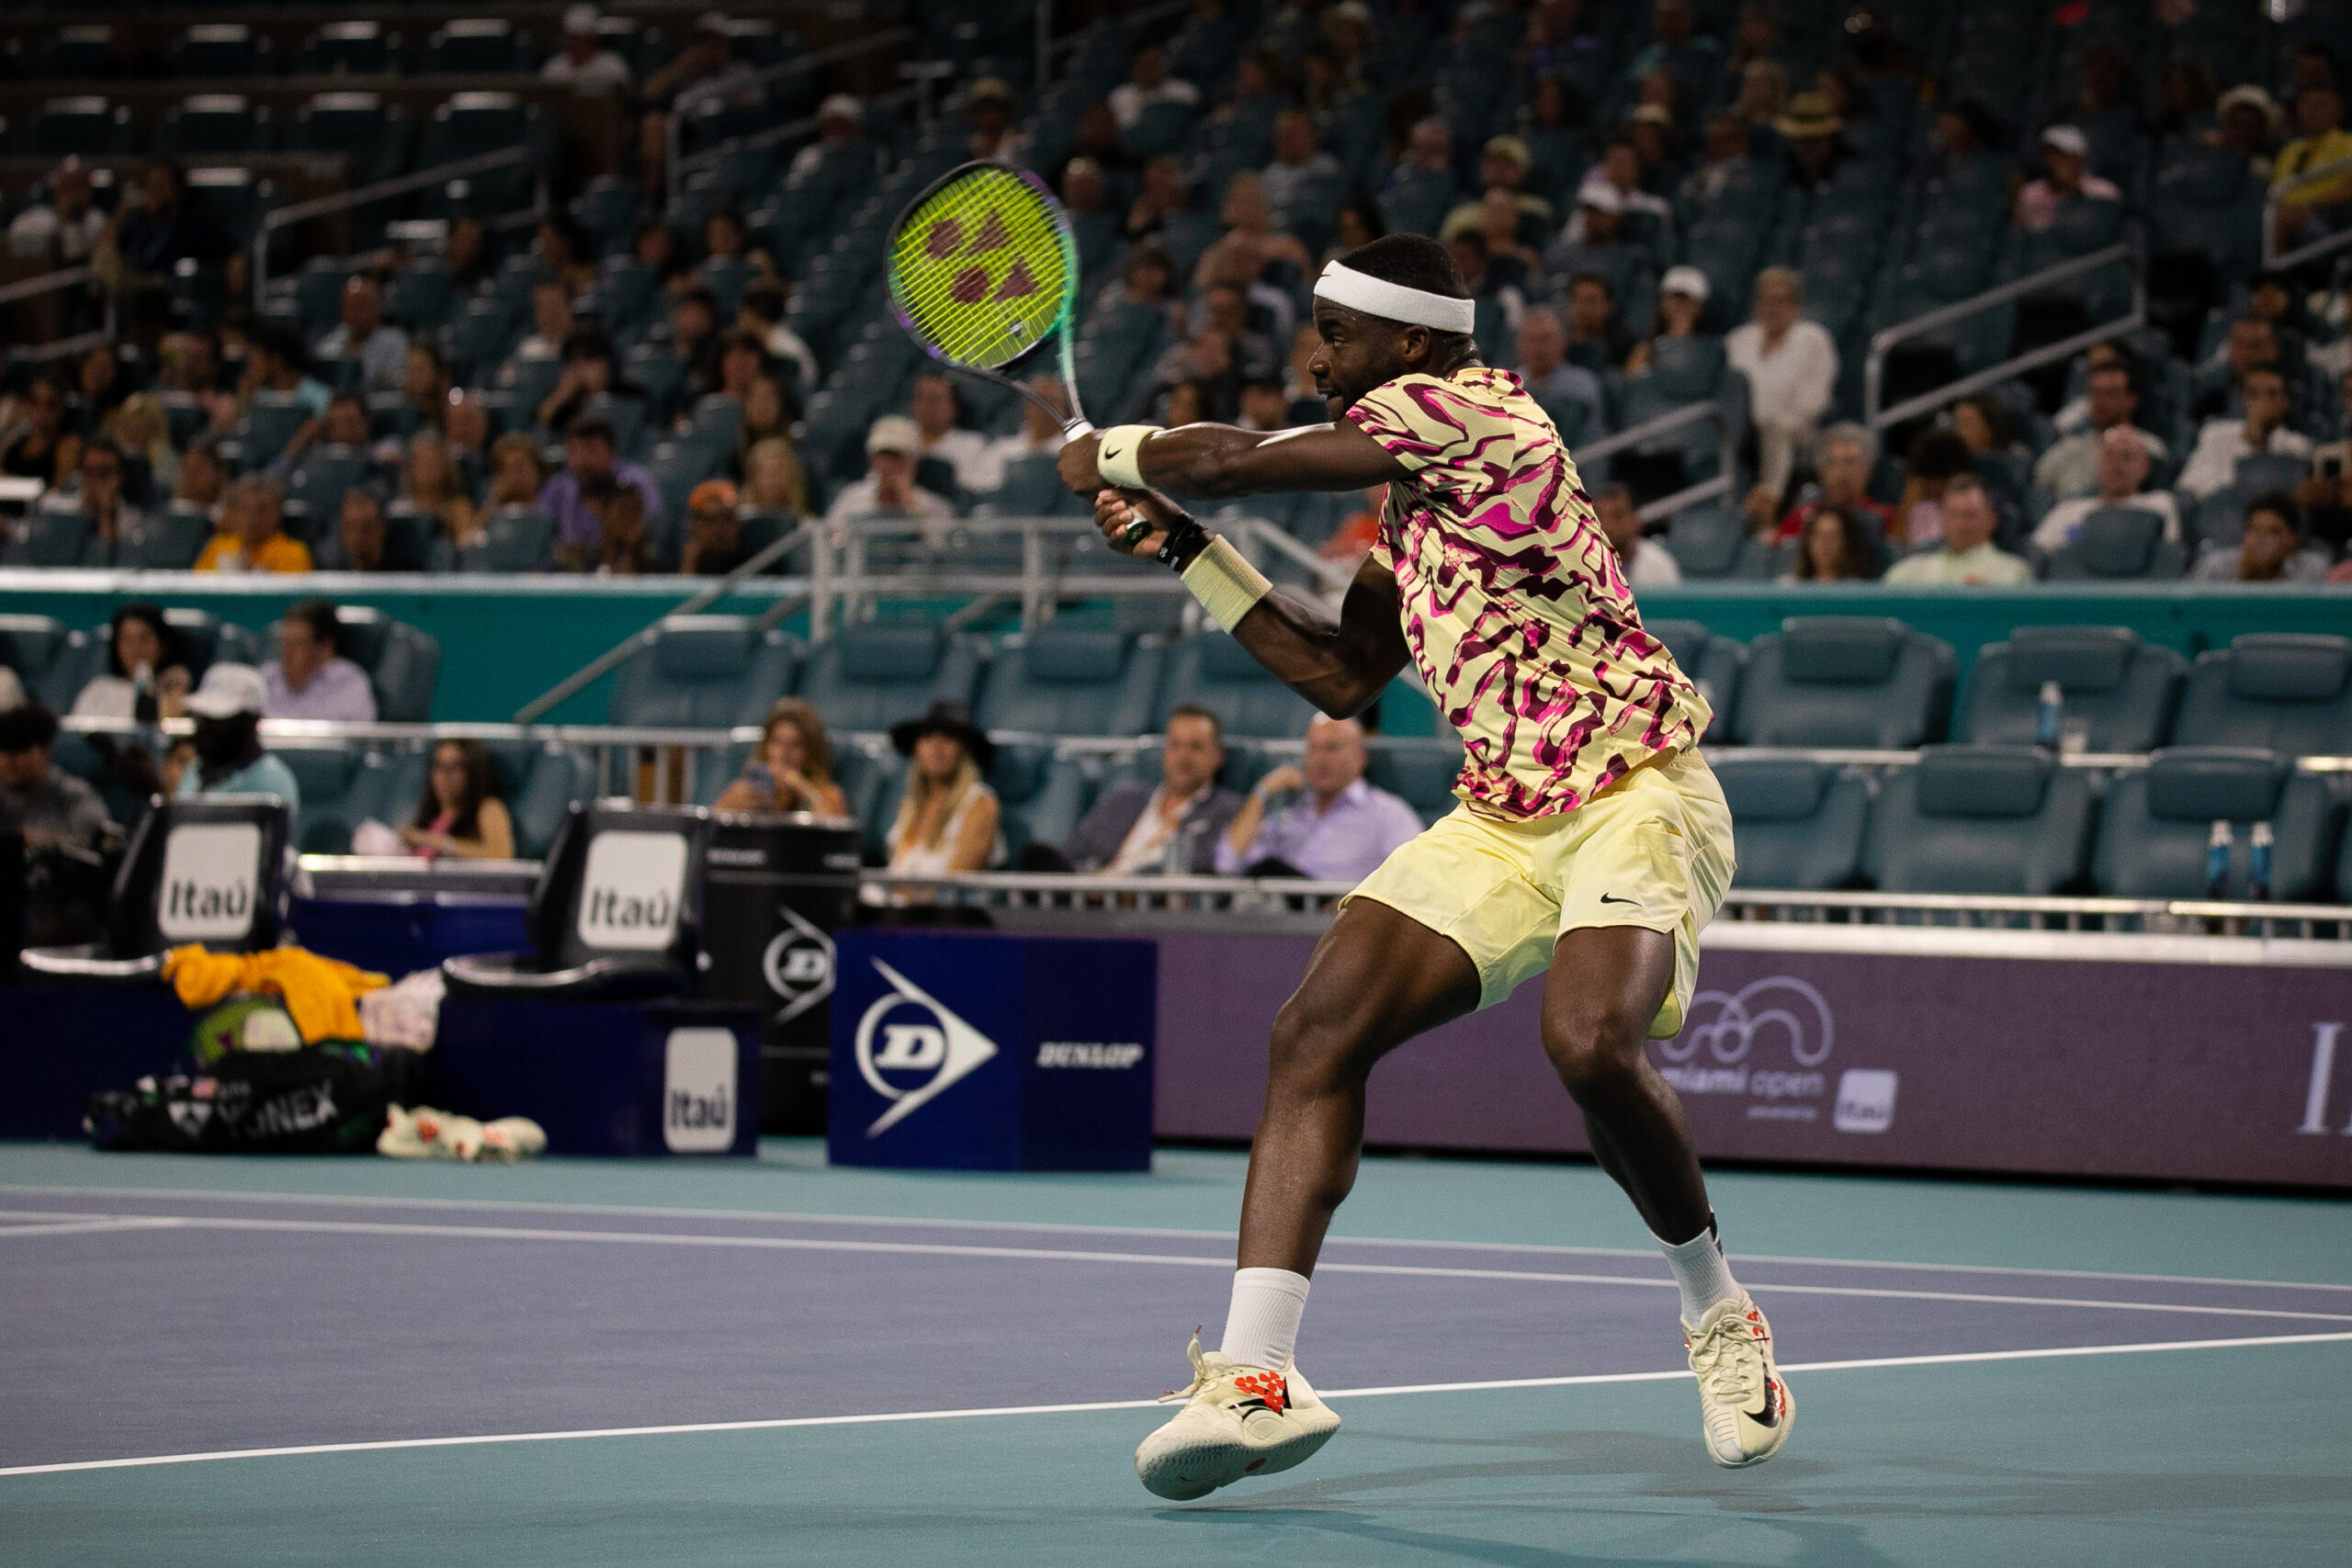 Frances Tiafoe on March 27, 2023 at the Miami Open